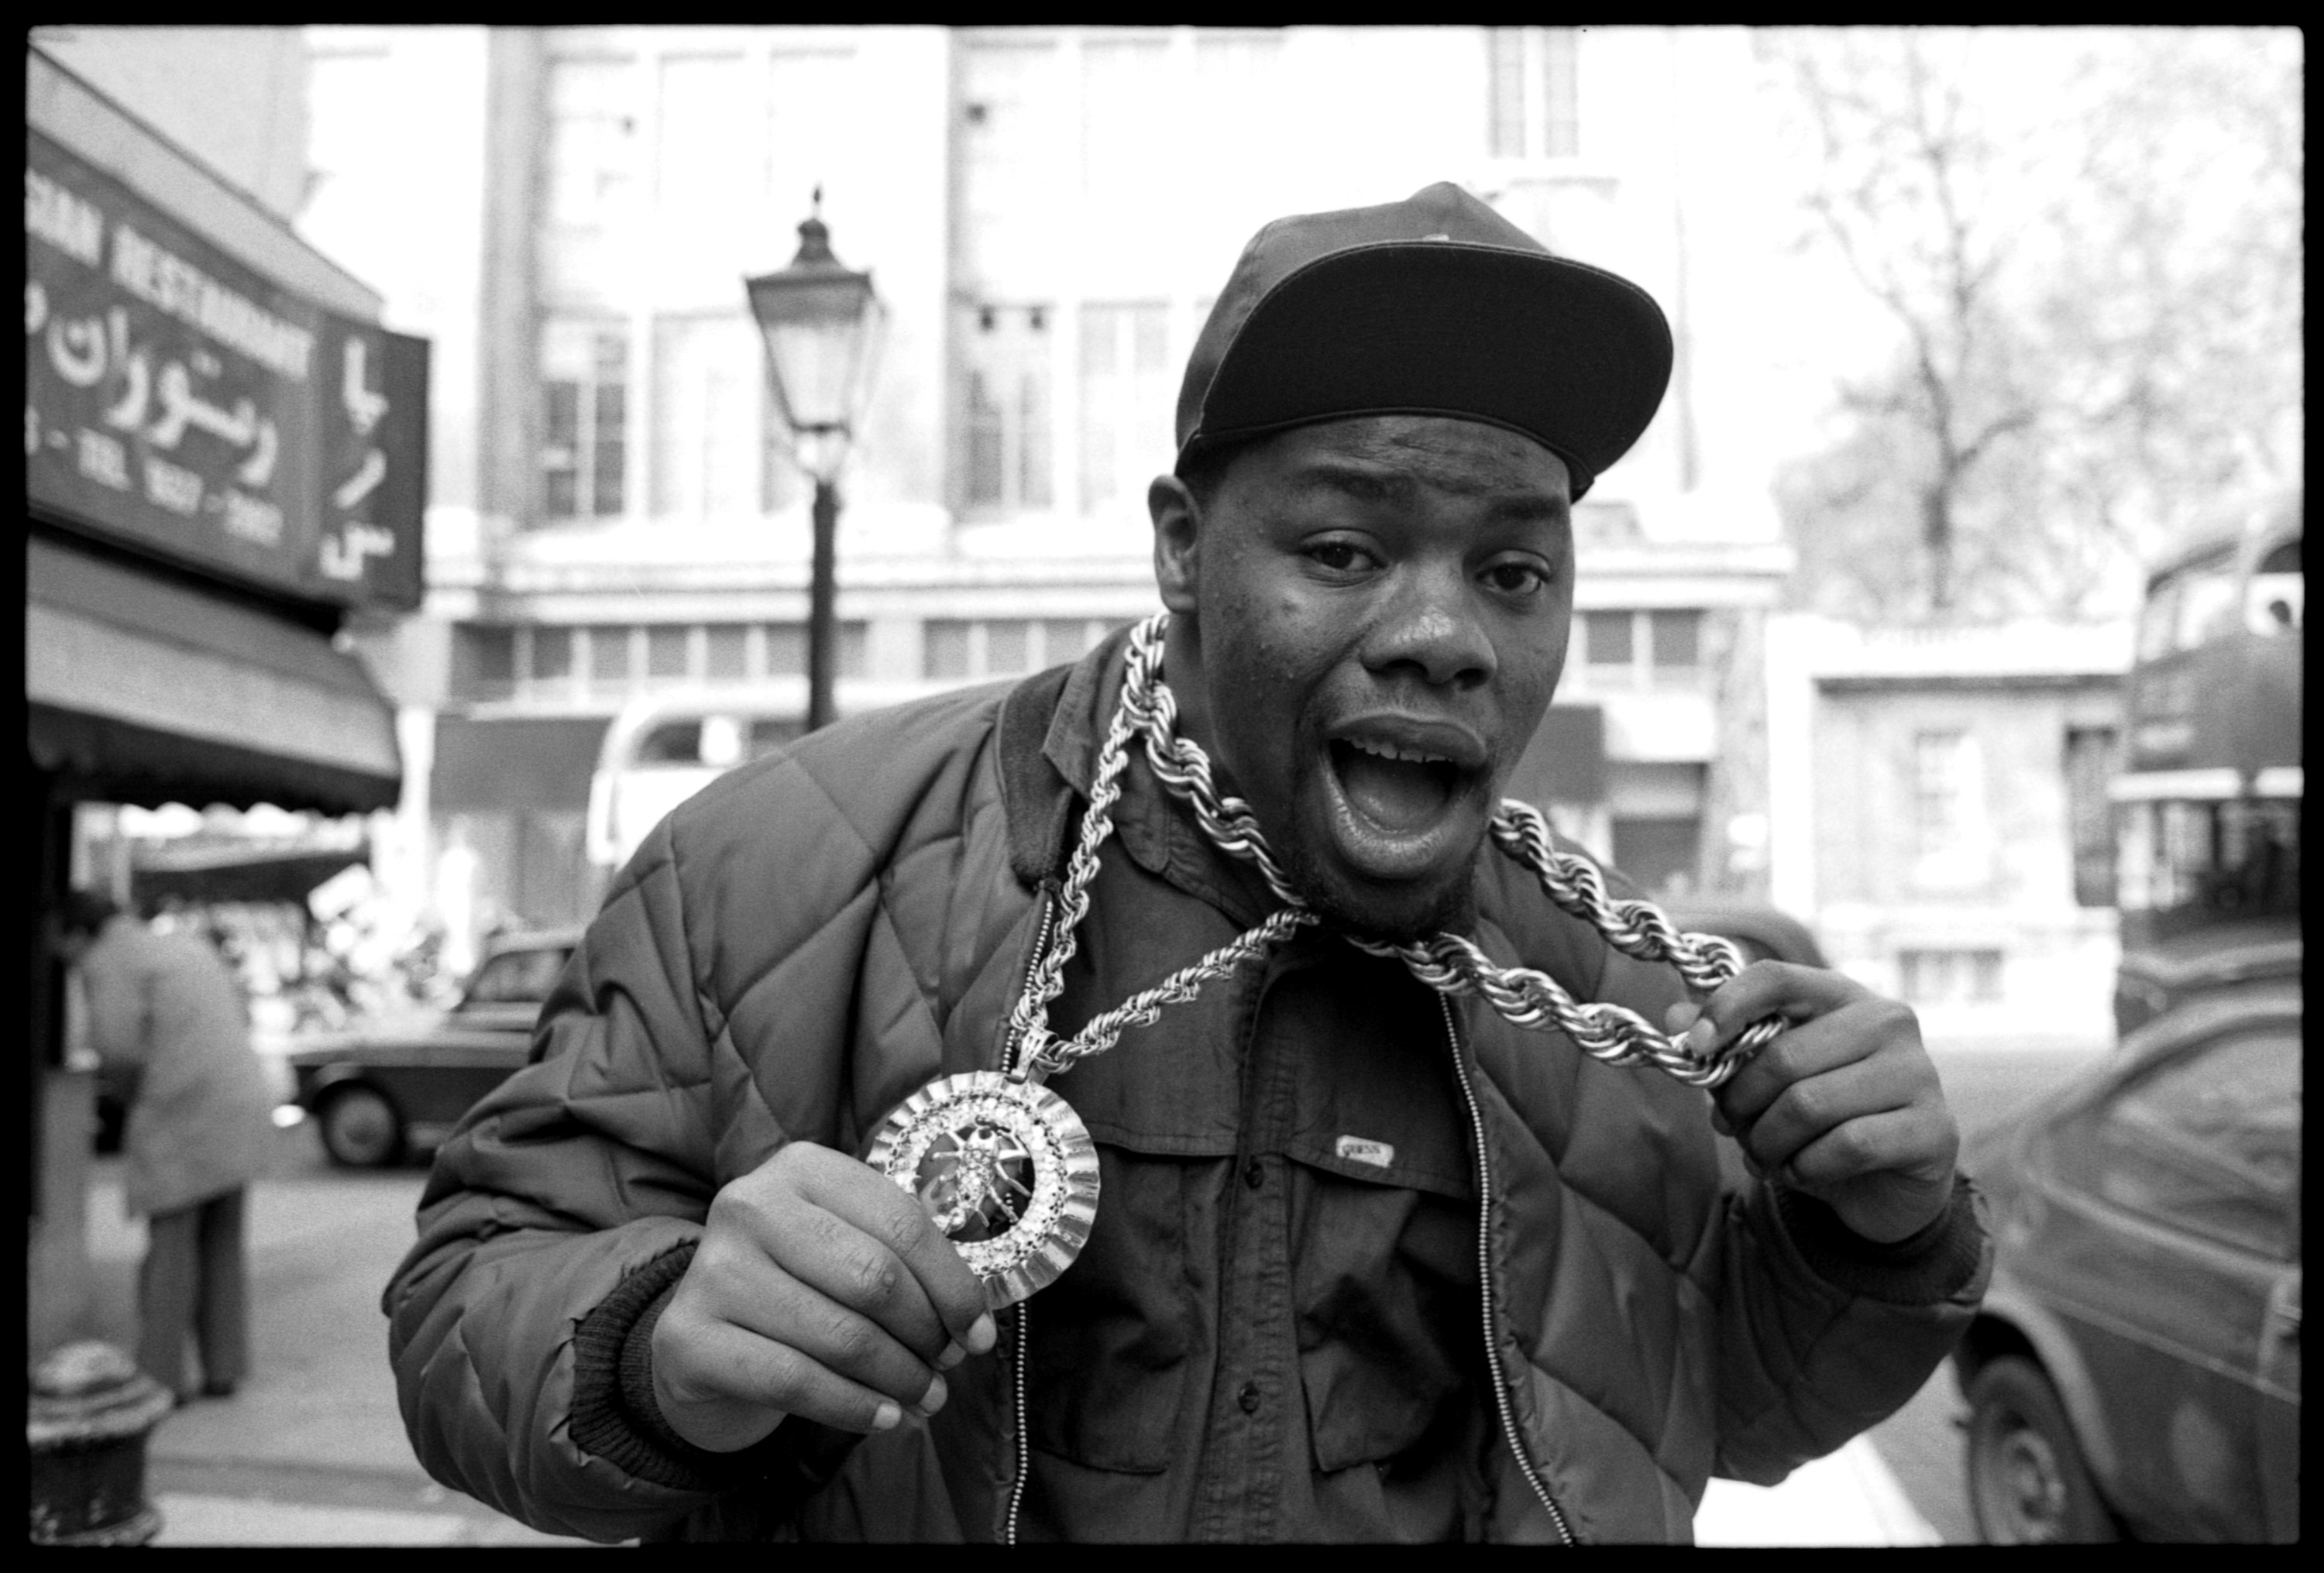 Biz Markie on a street with two chains making a face for the camera